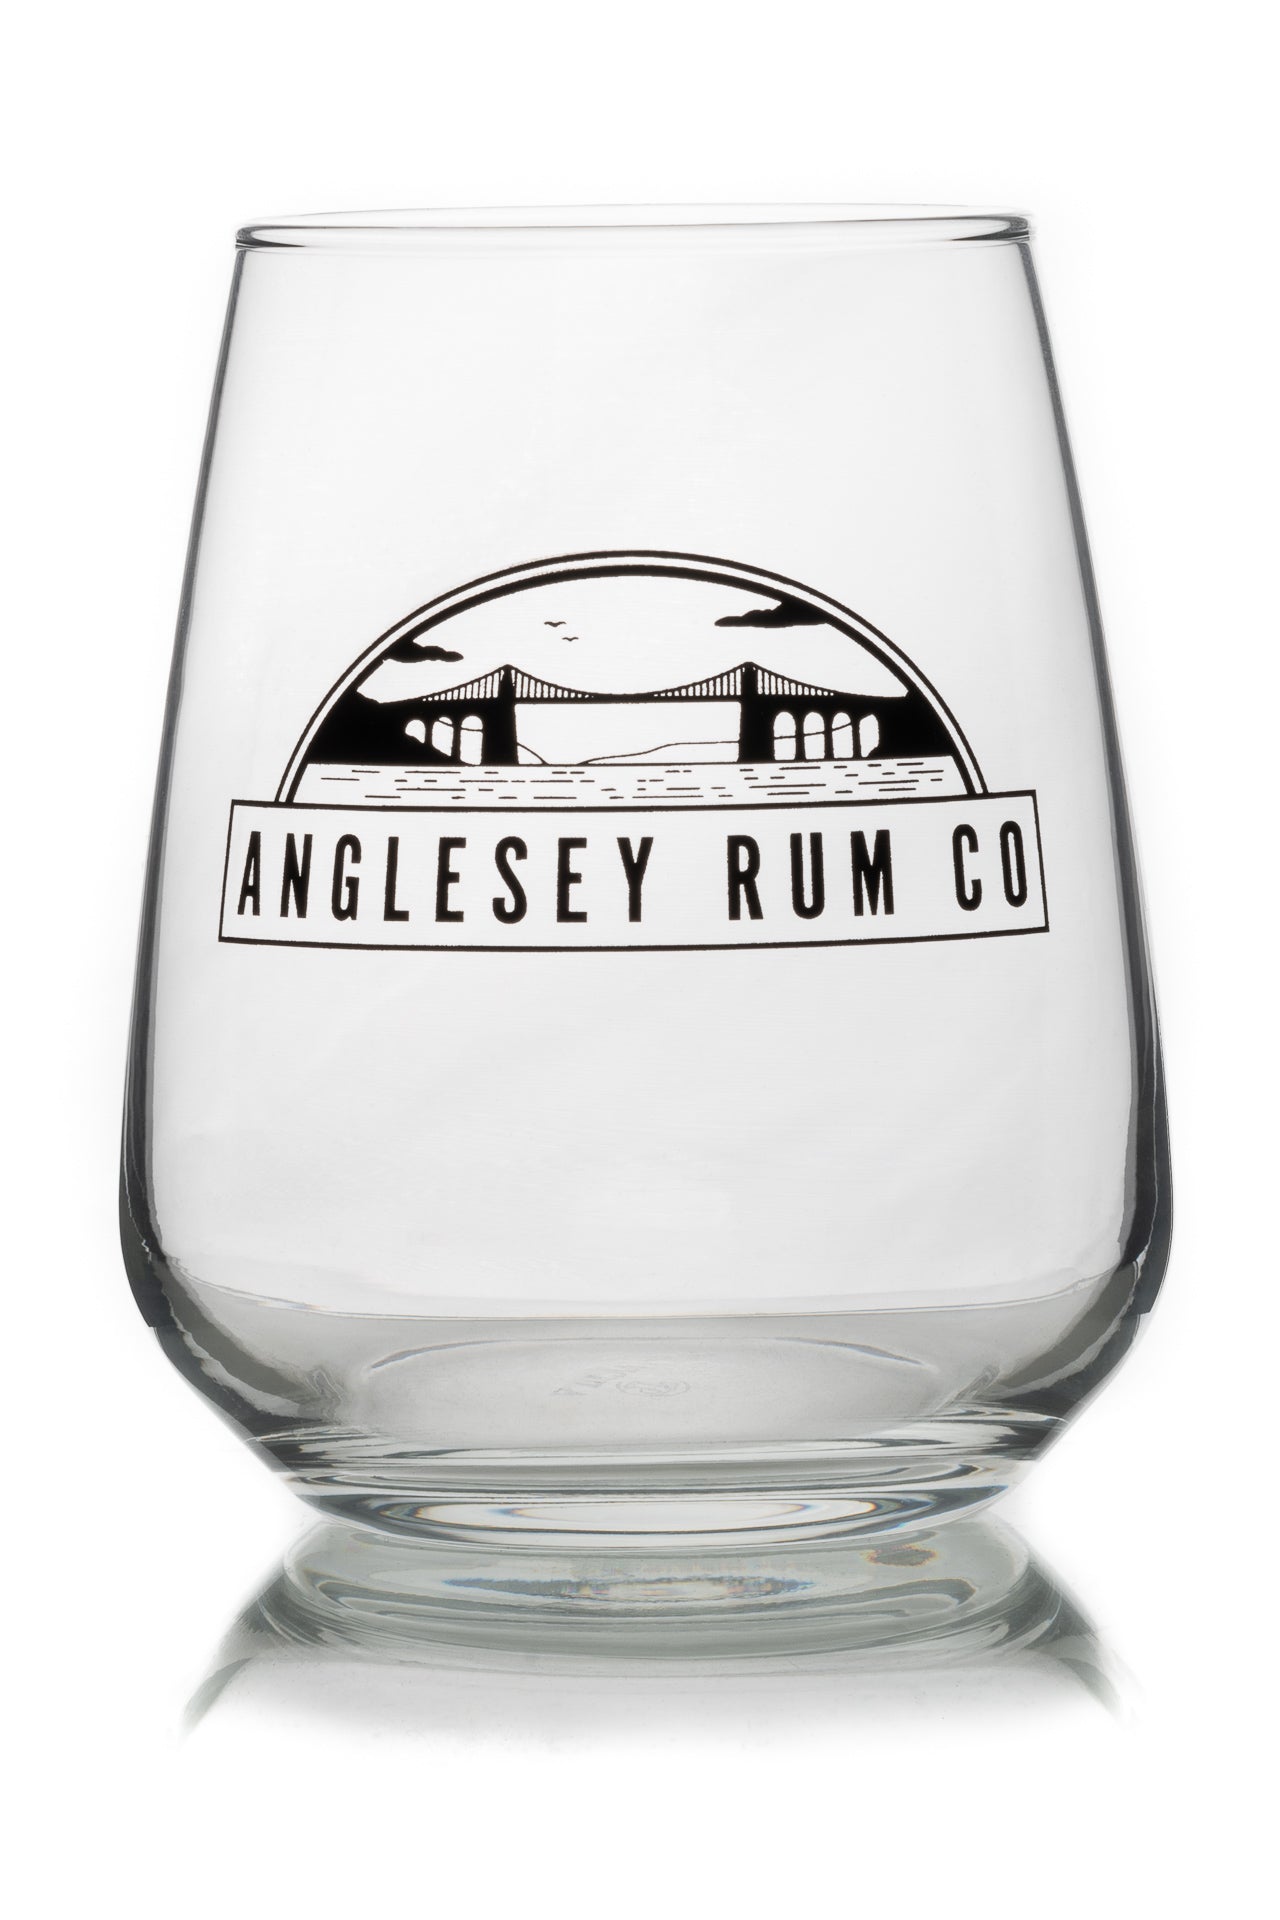 Anglesey Rum Co Glass - Craft Rum from The Isle of Anglesey - The Spirit of Wales